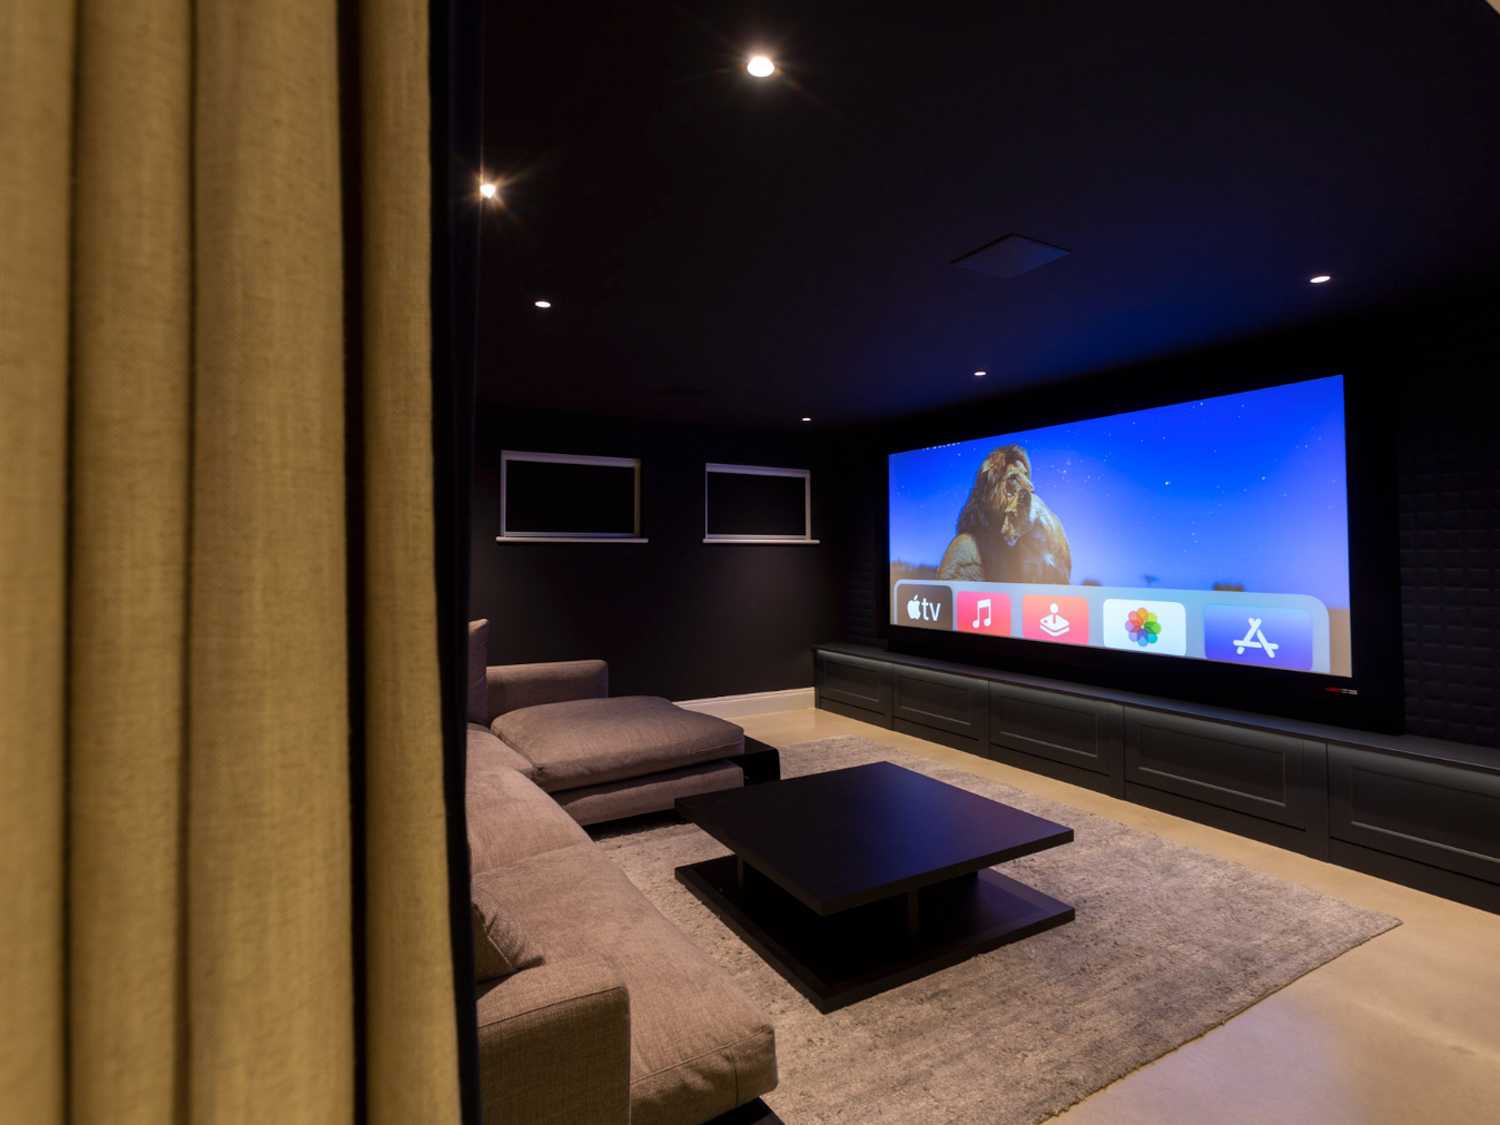 The home cinema is fun for the whole family to enjoy